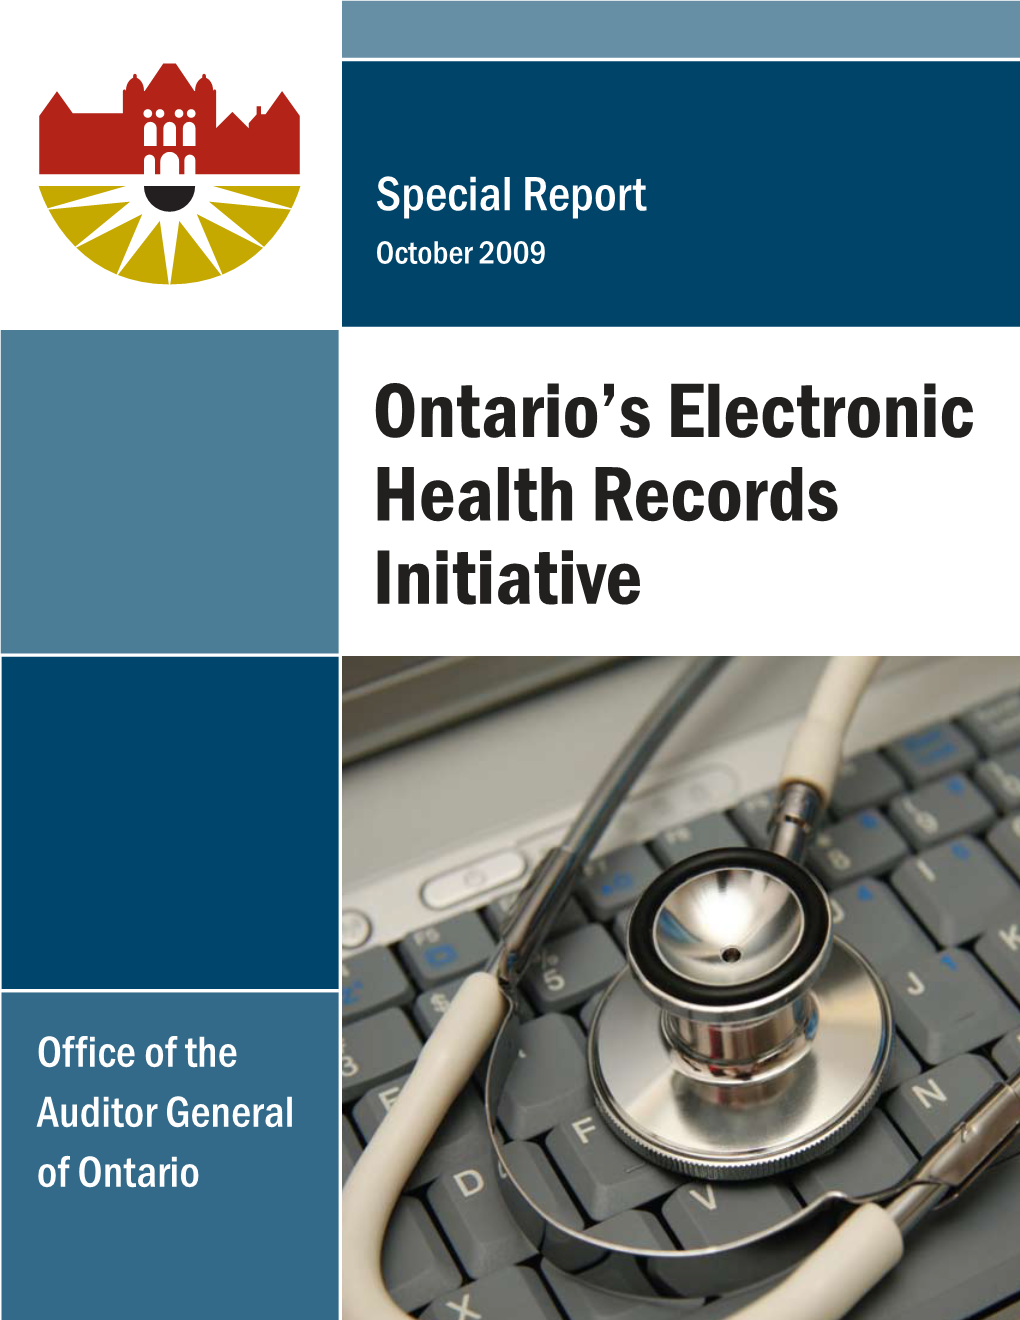 Ontario's Electronic Health Records Initiative (Special Report)